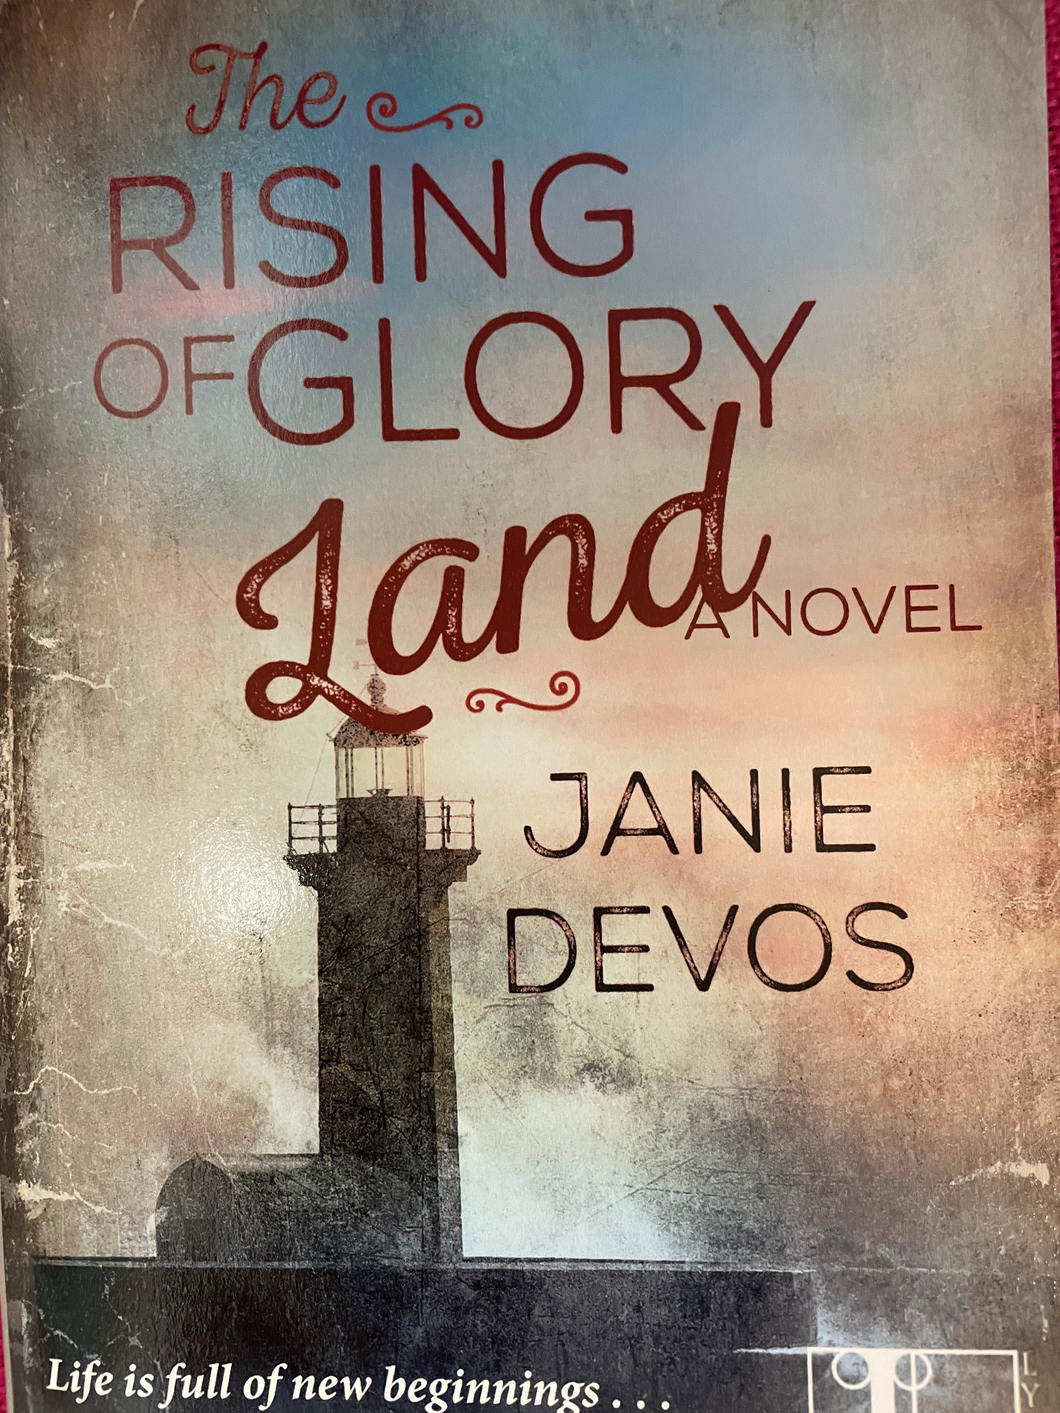 THE RISING OF GLORY LAND